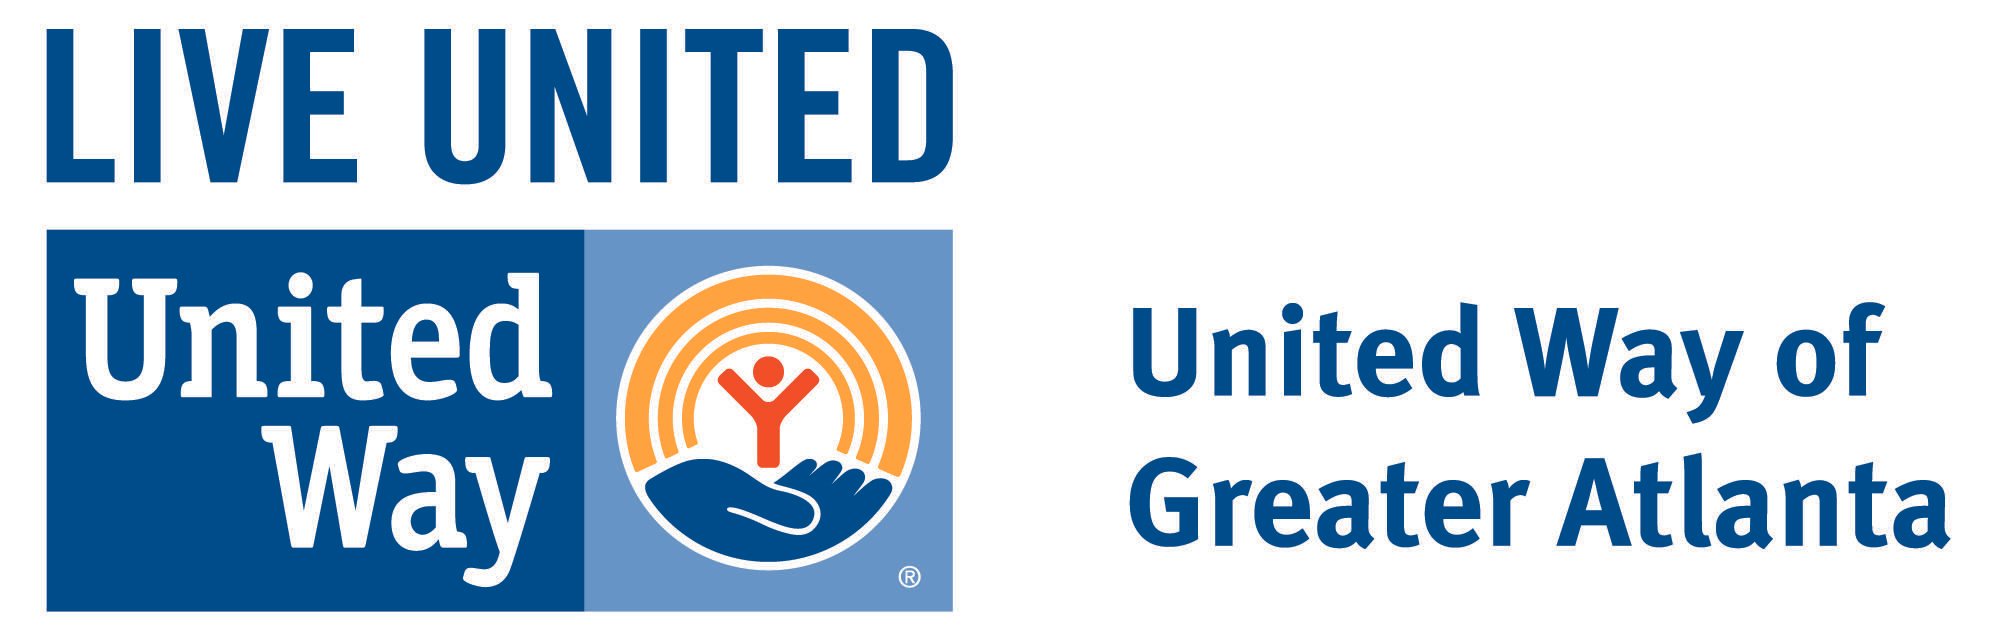 united-way-of-greater-atlanta-inc_processed_d4e08e4ca9a77d506f0d014bdfae0e4f843eab18de31e6b6bf8b523336345563_logo.jpg